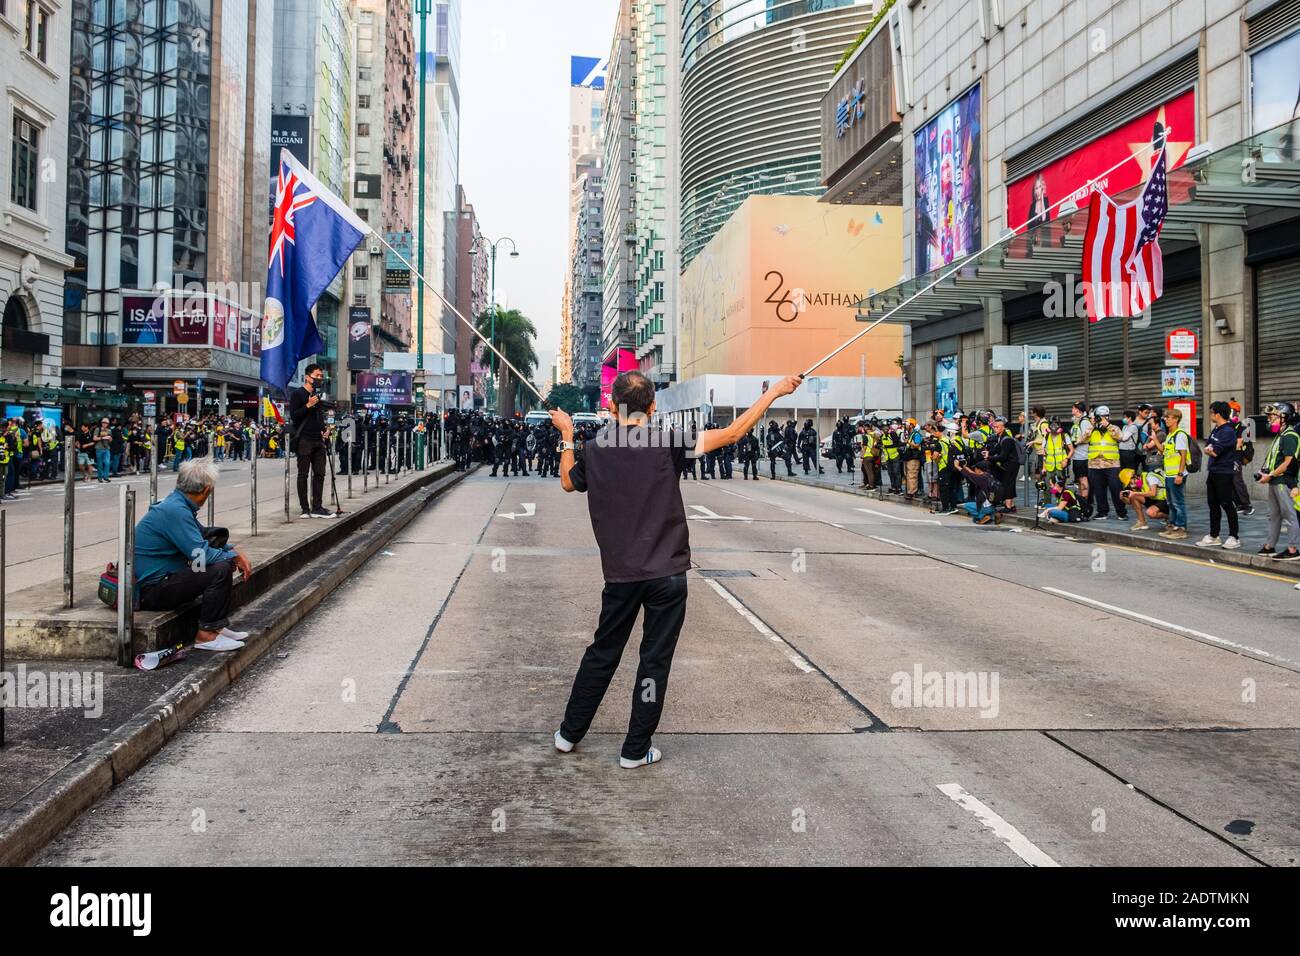 HongKong - December 01, 2019: Crowd of people on demonstration during the 2019 protests in Hongkong, a series of demonstrations in Hongkong Stock Photo